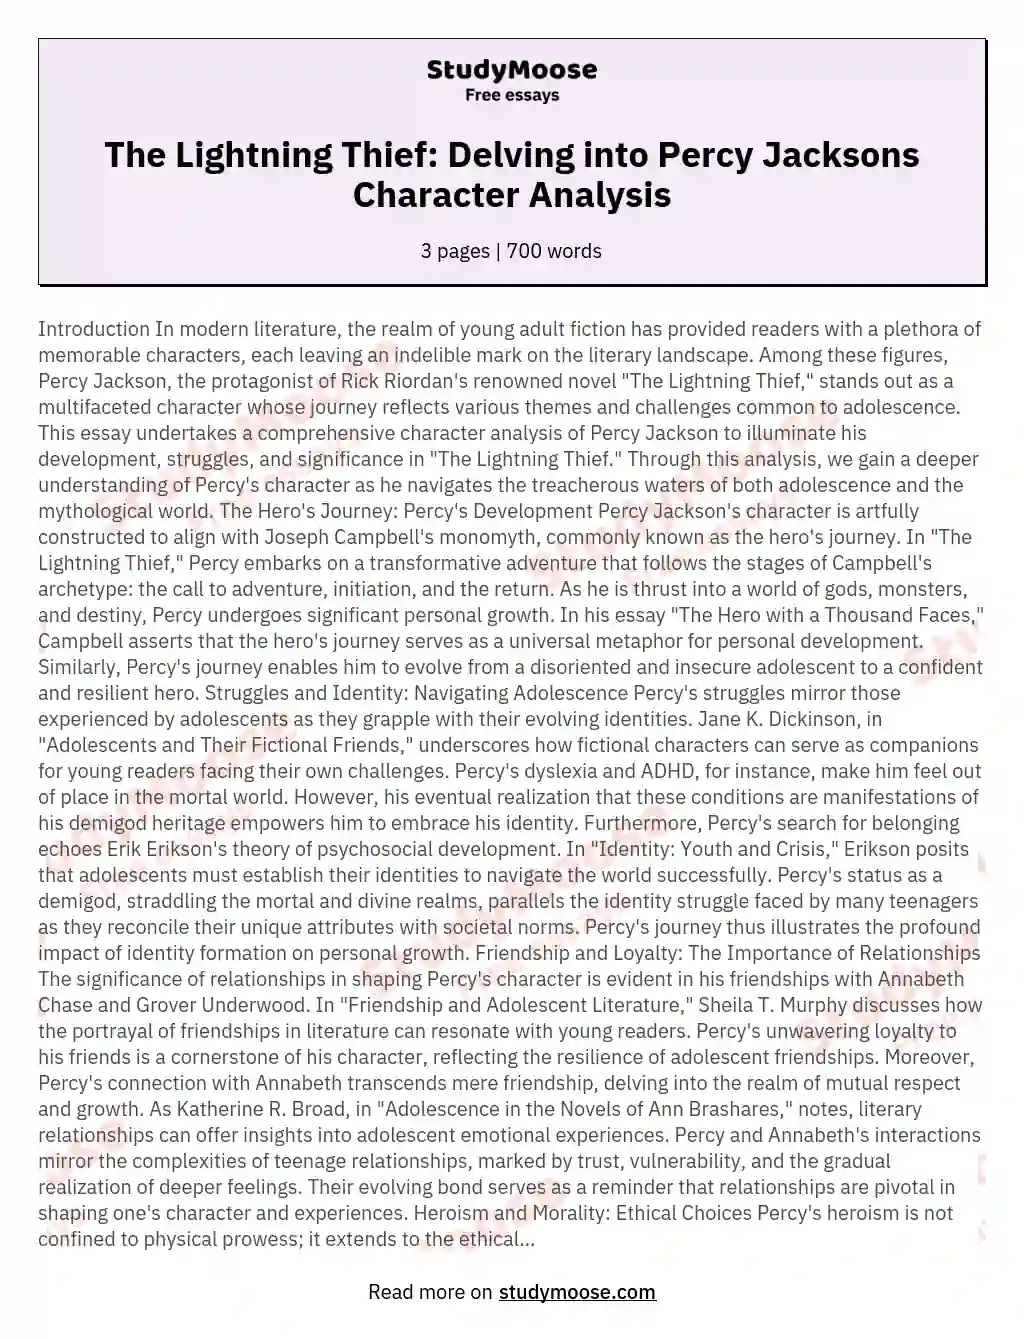 The Lightning Thief: Delving into Percy Jacksons Character Analysis essay